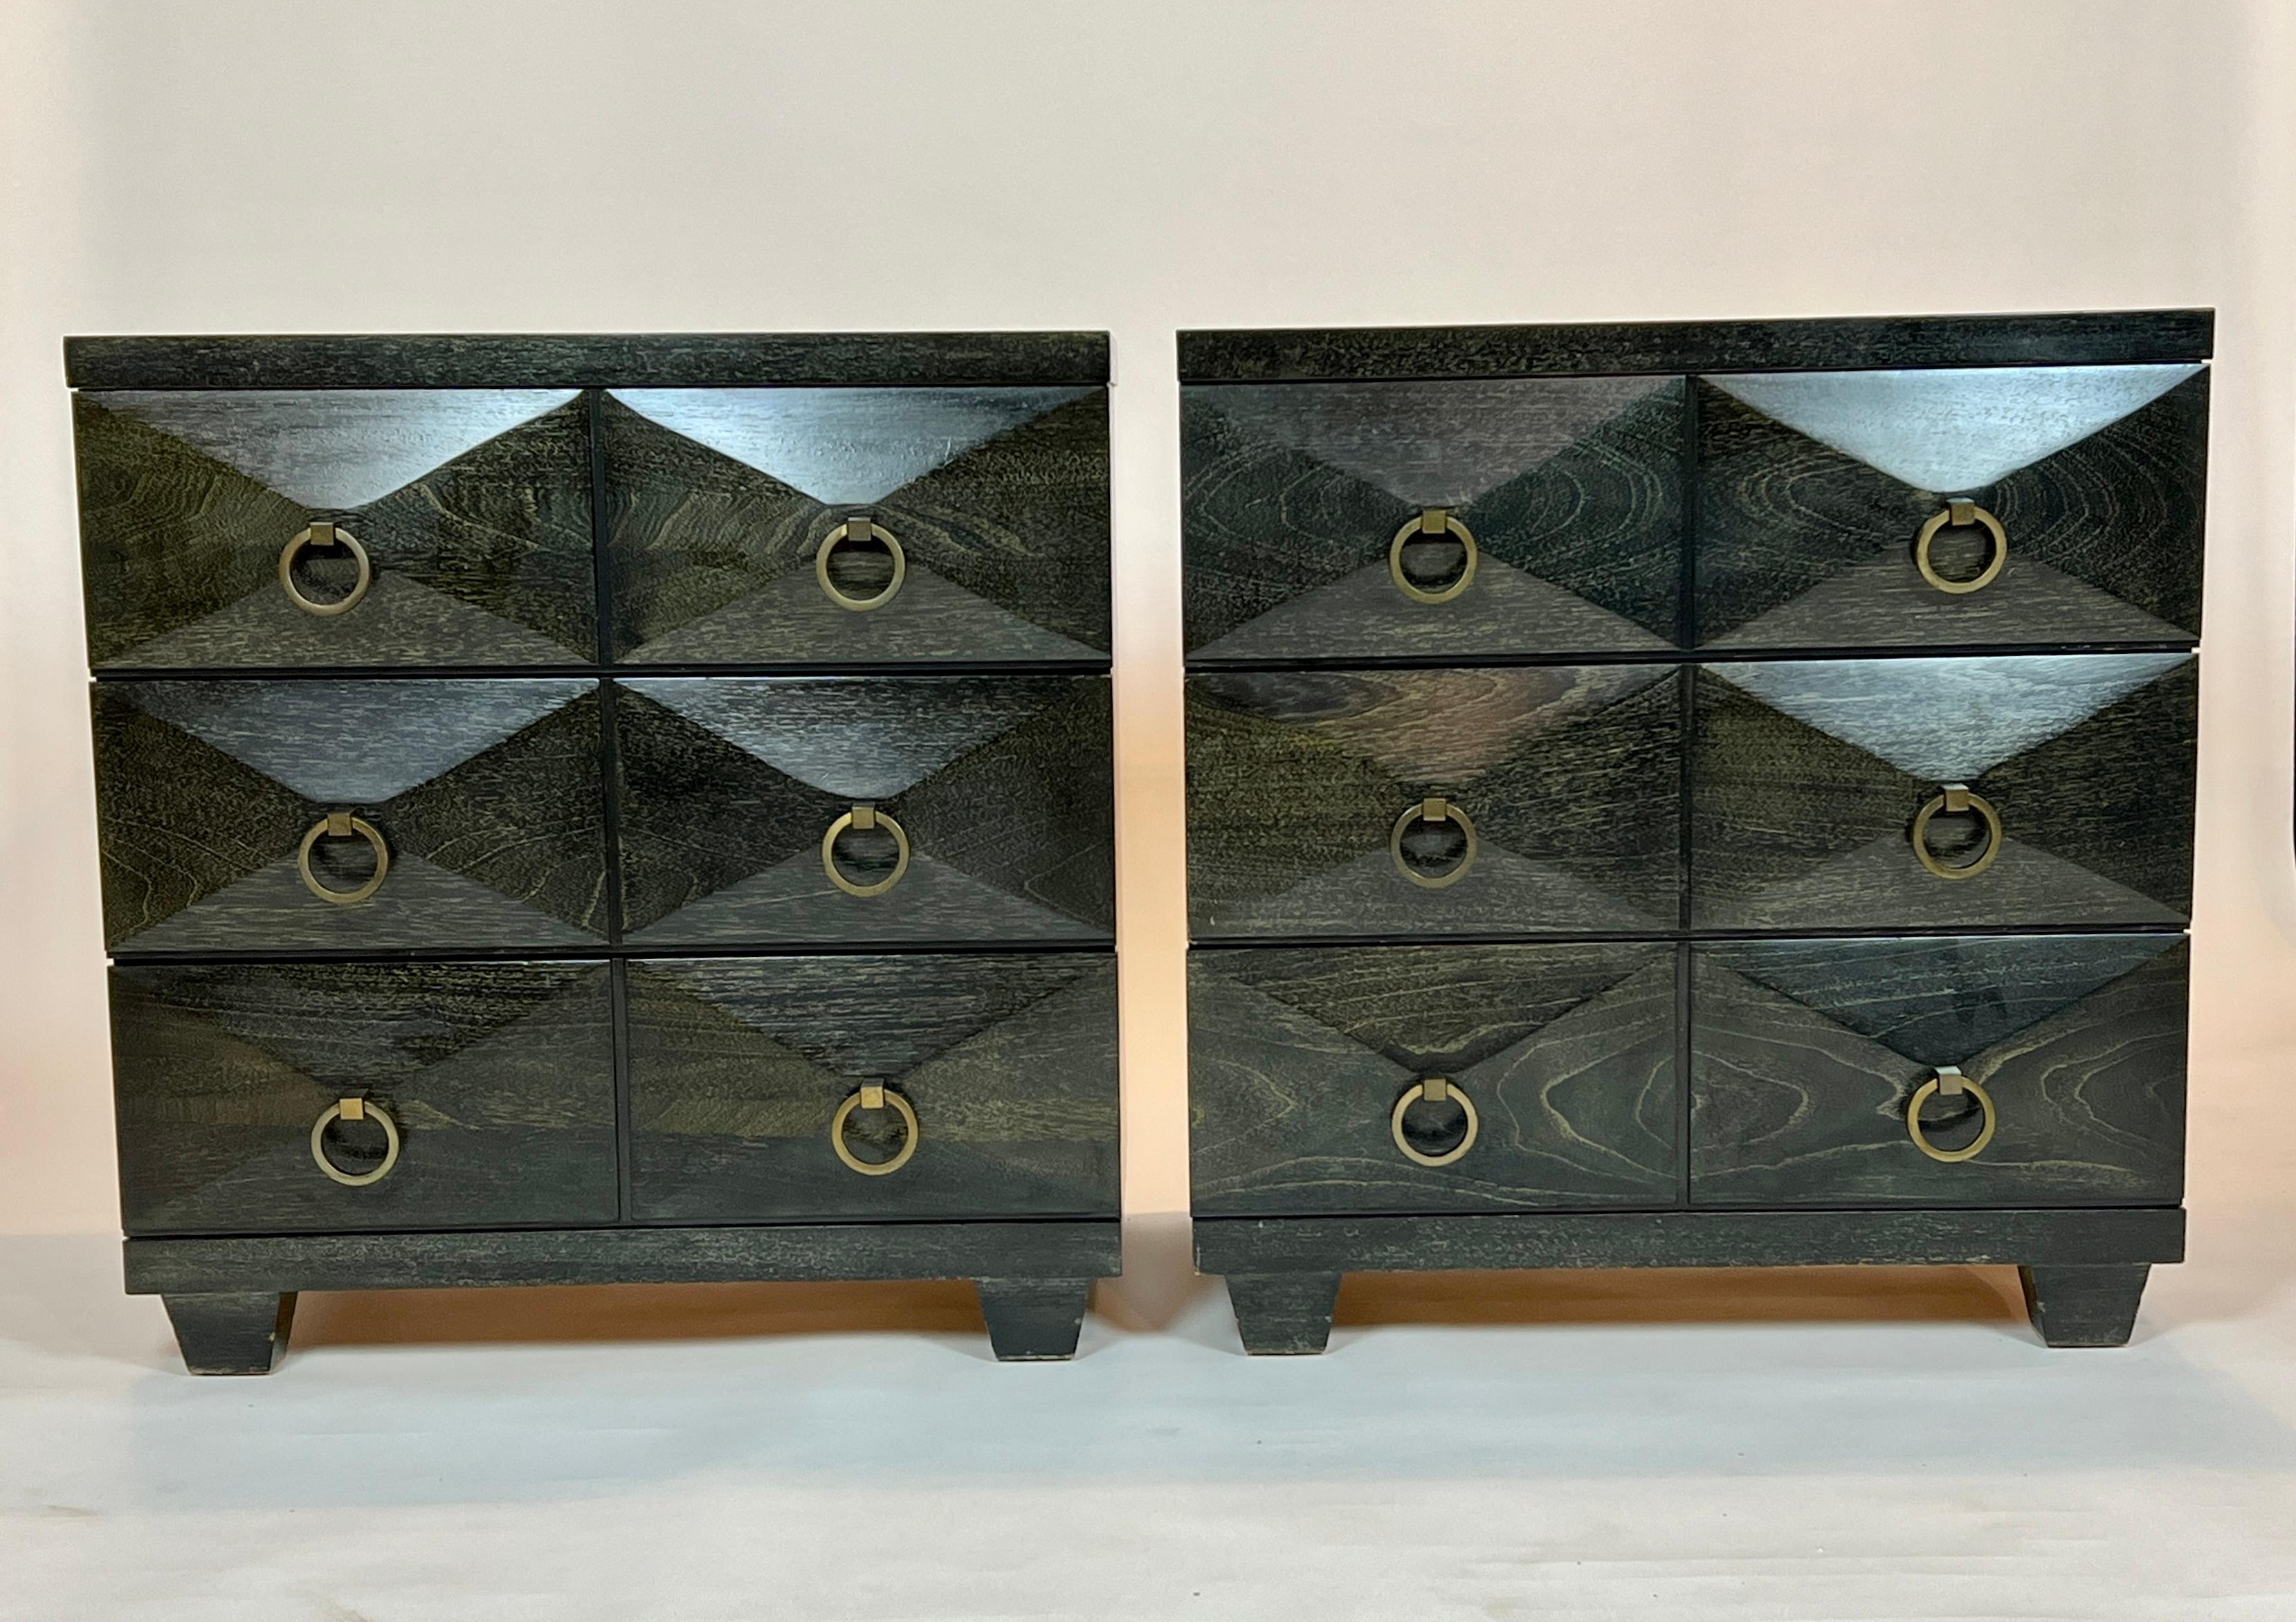 Pair of silver fox black cerused wood chests by Albert Furniture in Shelbyville, Indiana. These classic chests of drawers have diamond convex fronts and aged brass ring pulls. Amazingly clean condition for their age.